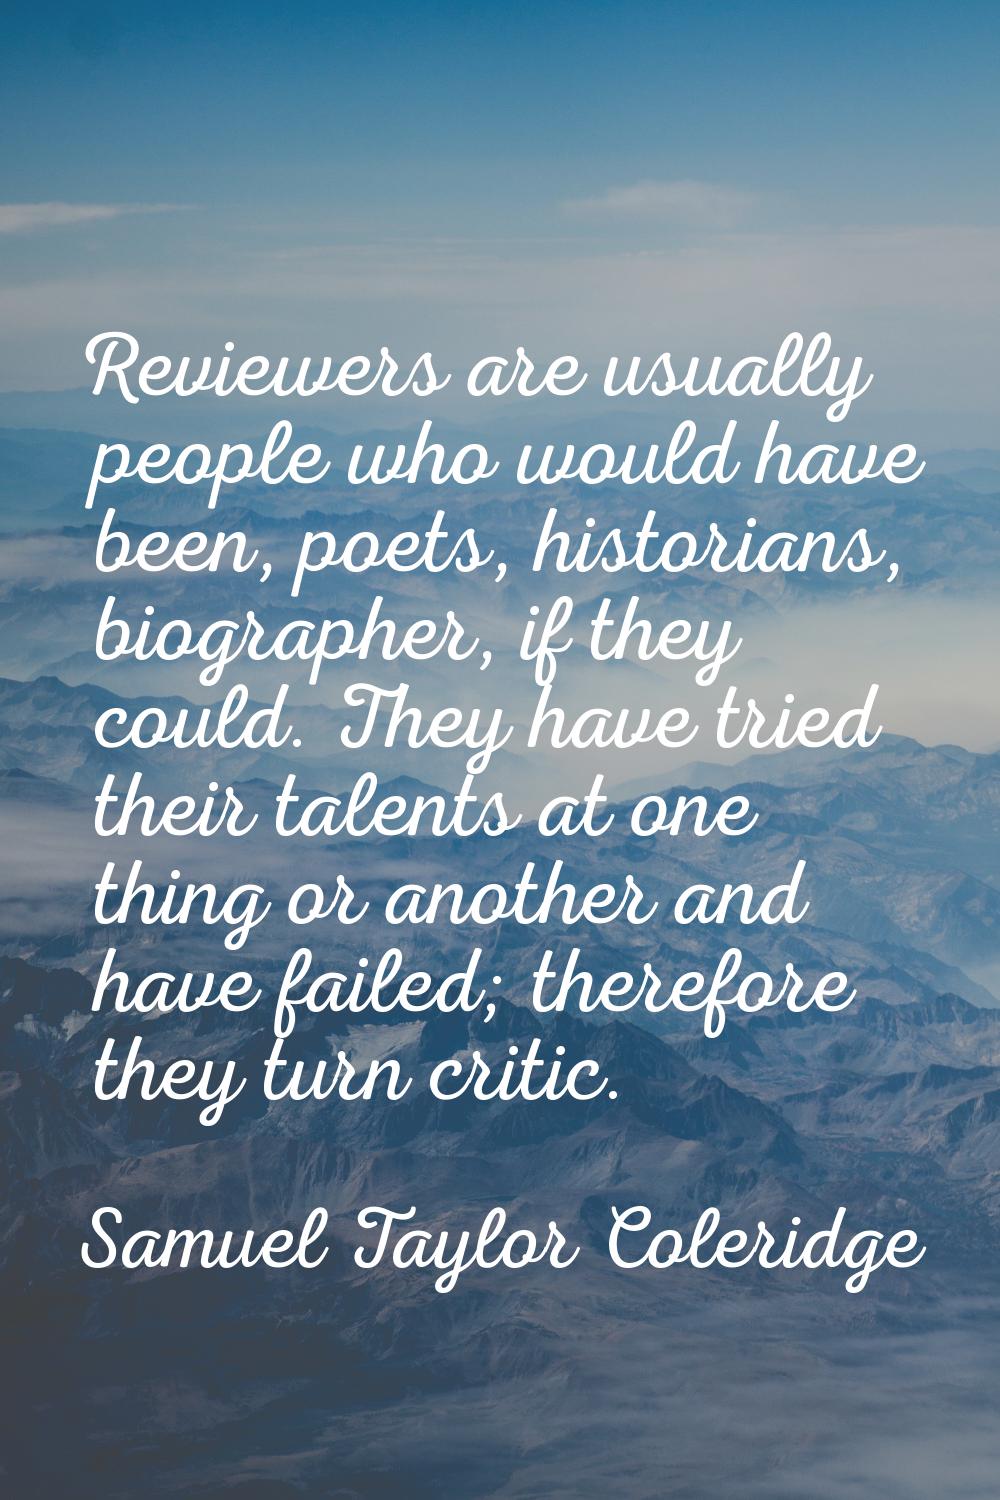 Reviewers are usually people who would have been, poets, historians, biographer, if they could. The